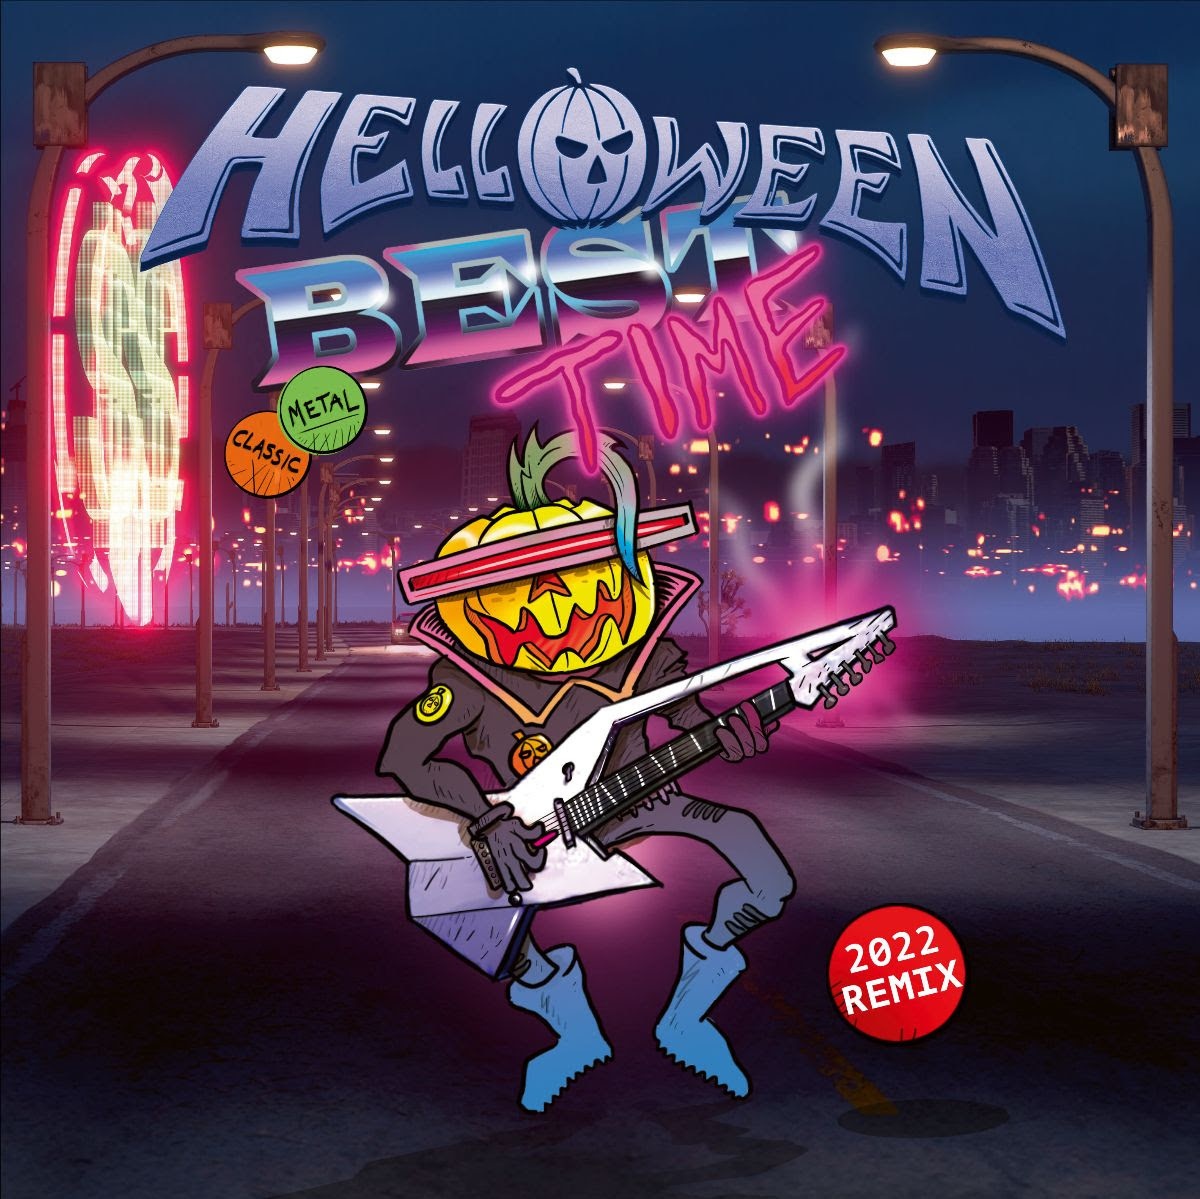 HELLOWEEN Presents Music Video For “Best Time” Feat. Arch Enemy's Alissa White-Gluz